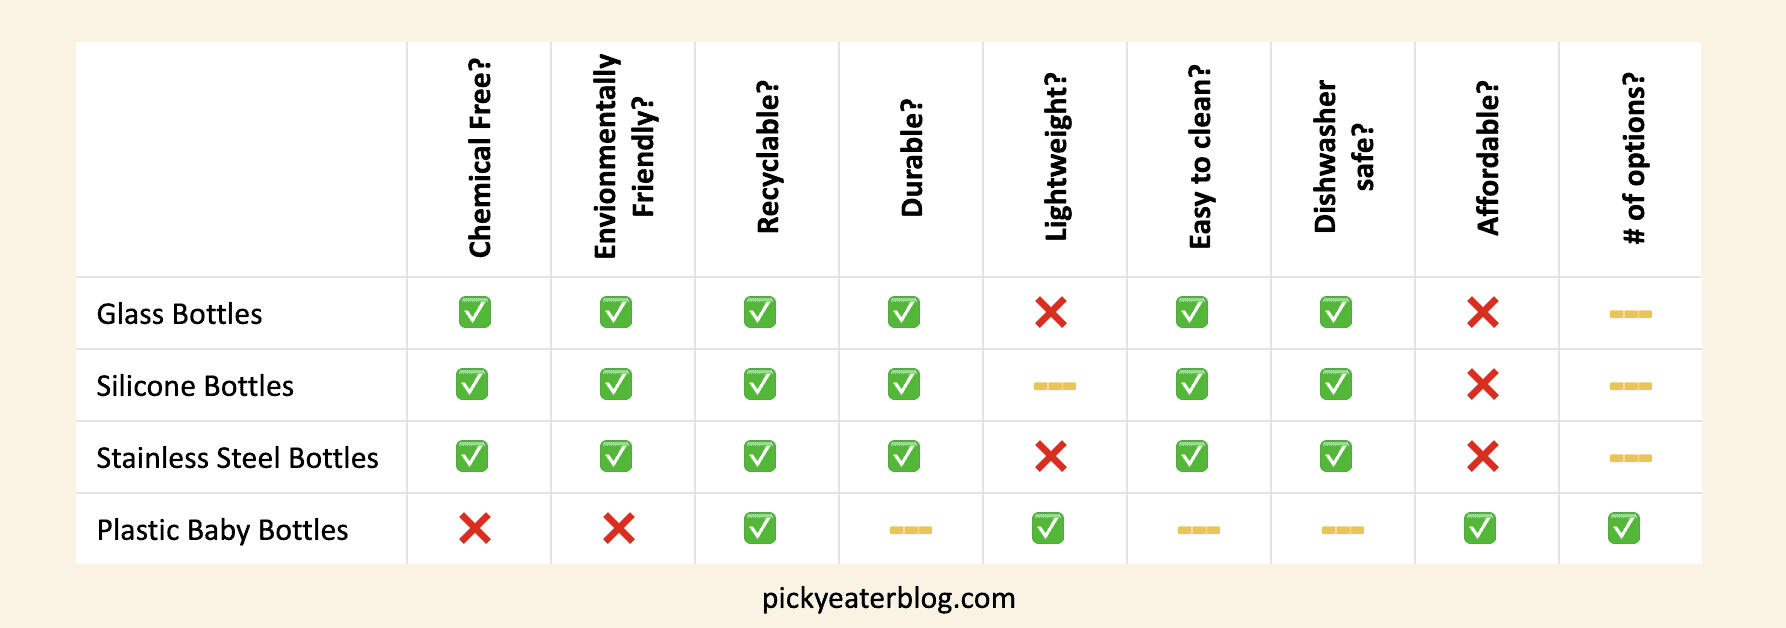 Glass vs. Silicone vs. Stainless Steel vs. Plastic Baby Bottles Infographic (Pros & Cons).